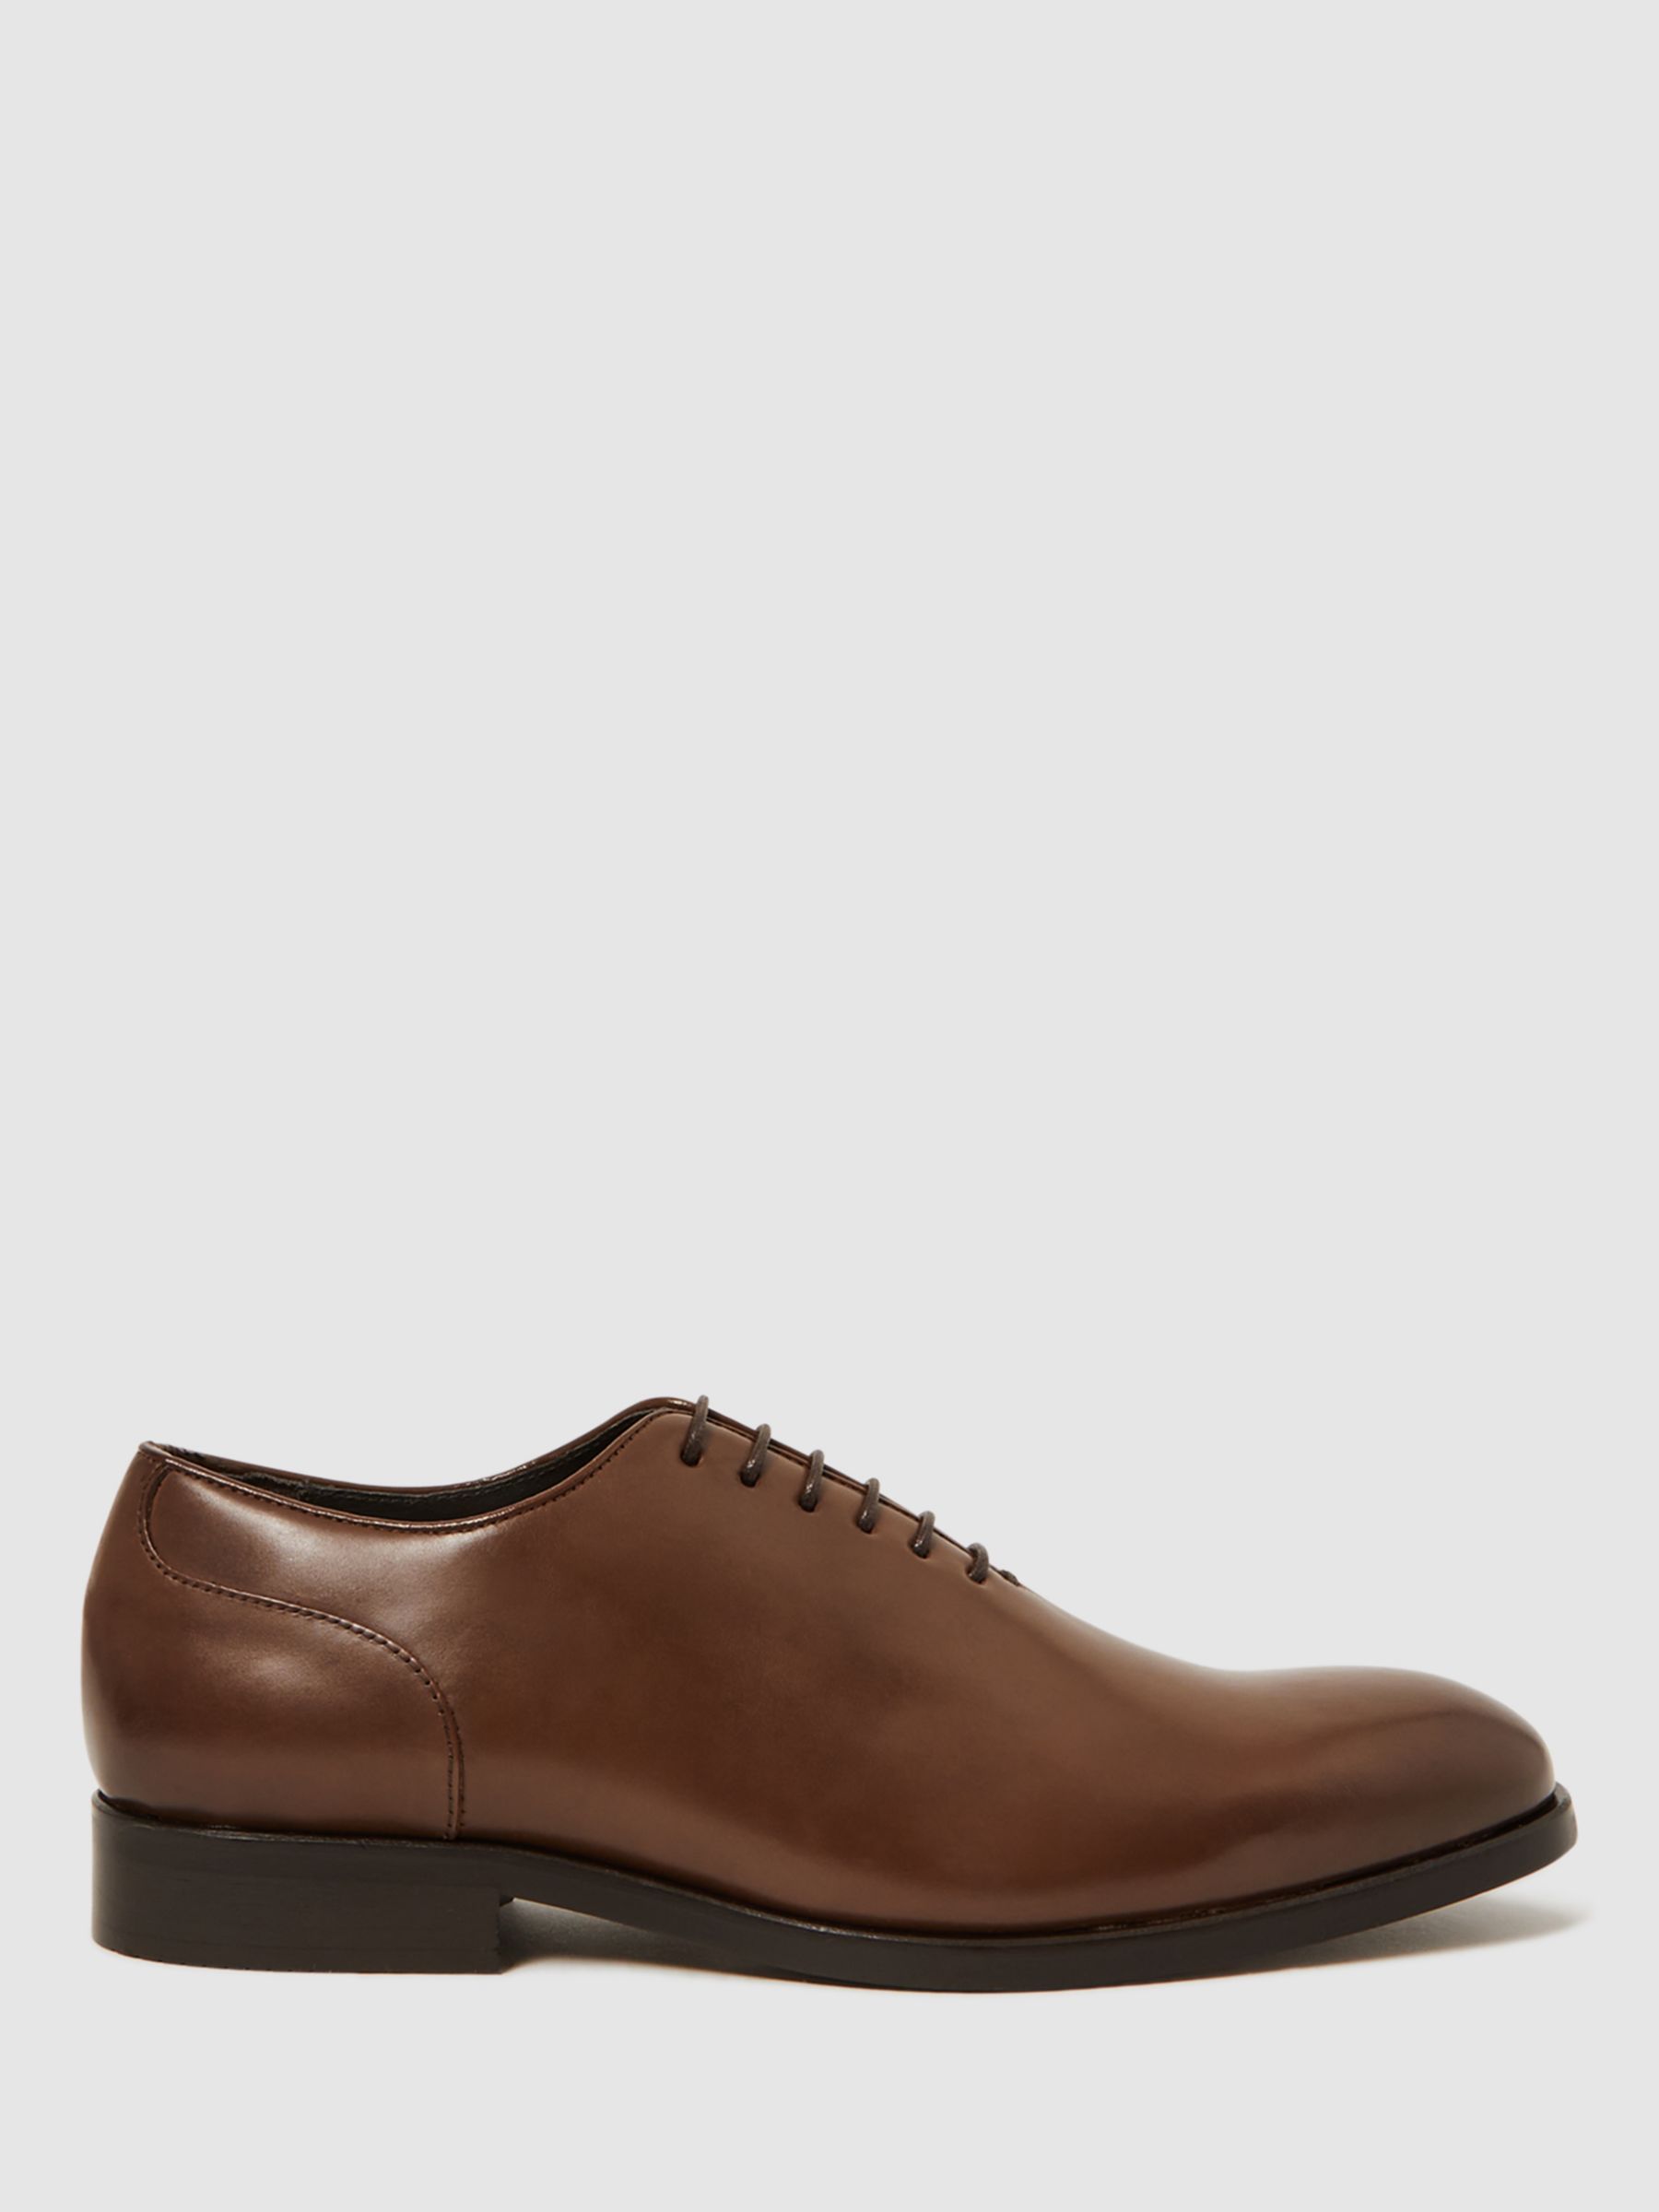 Reiss Bay Leather Whole Cut Shoes, Tan